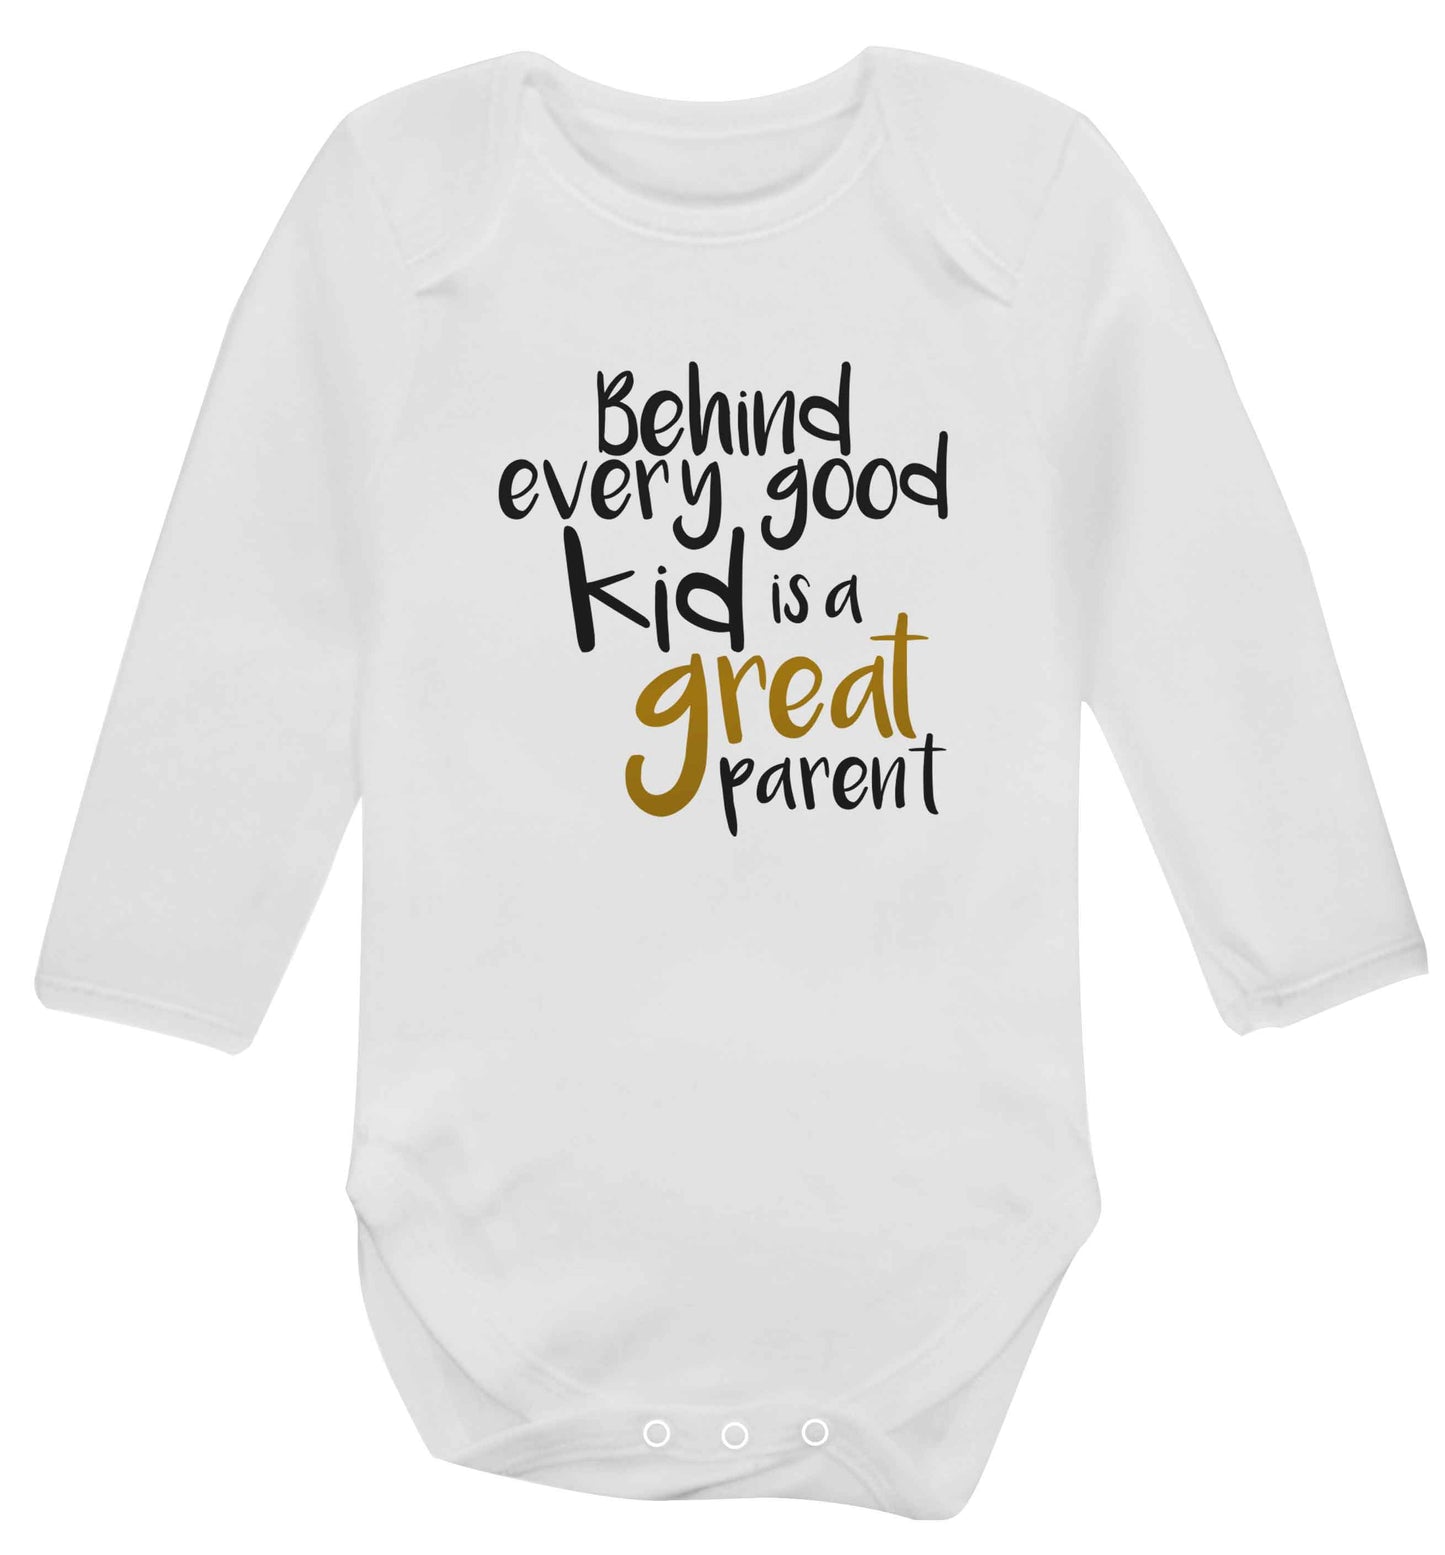 Behind every good kid is a great parent baby vest long sleeved white 6-12 months